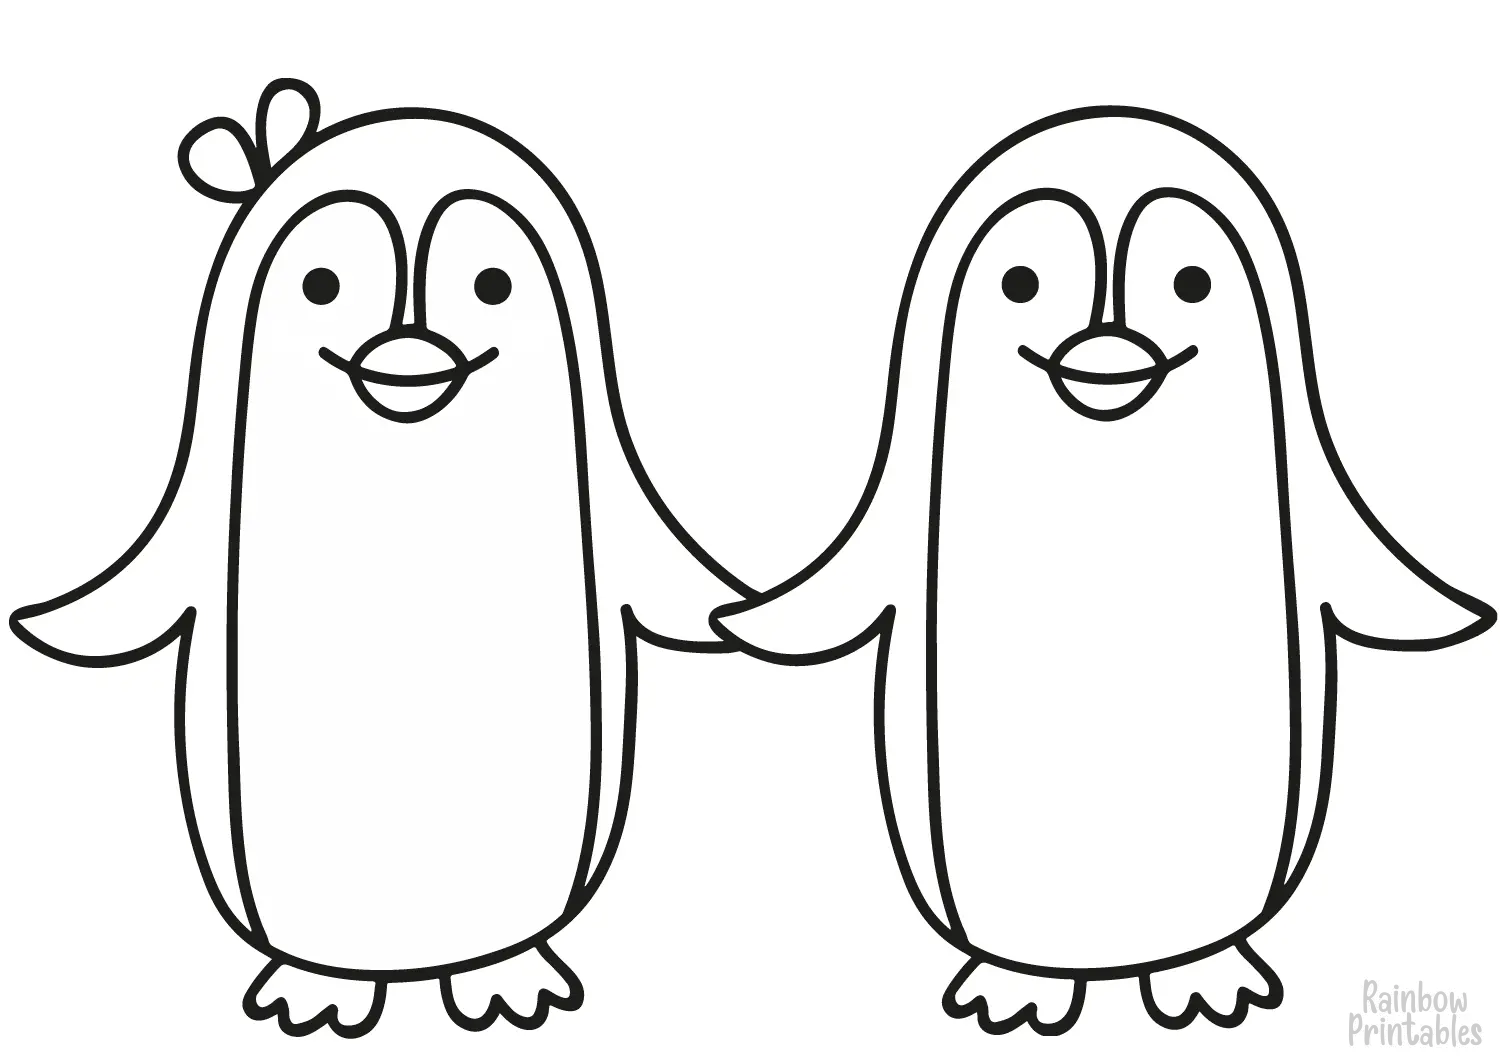 Simple Easy PENGUINS COUPLES Line Drawing Coloring Page for Kids